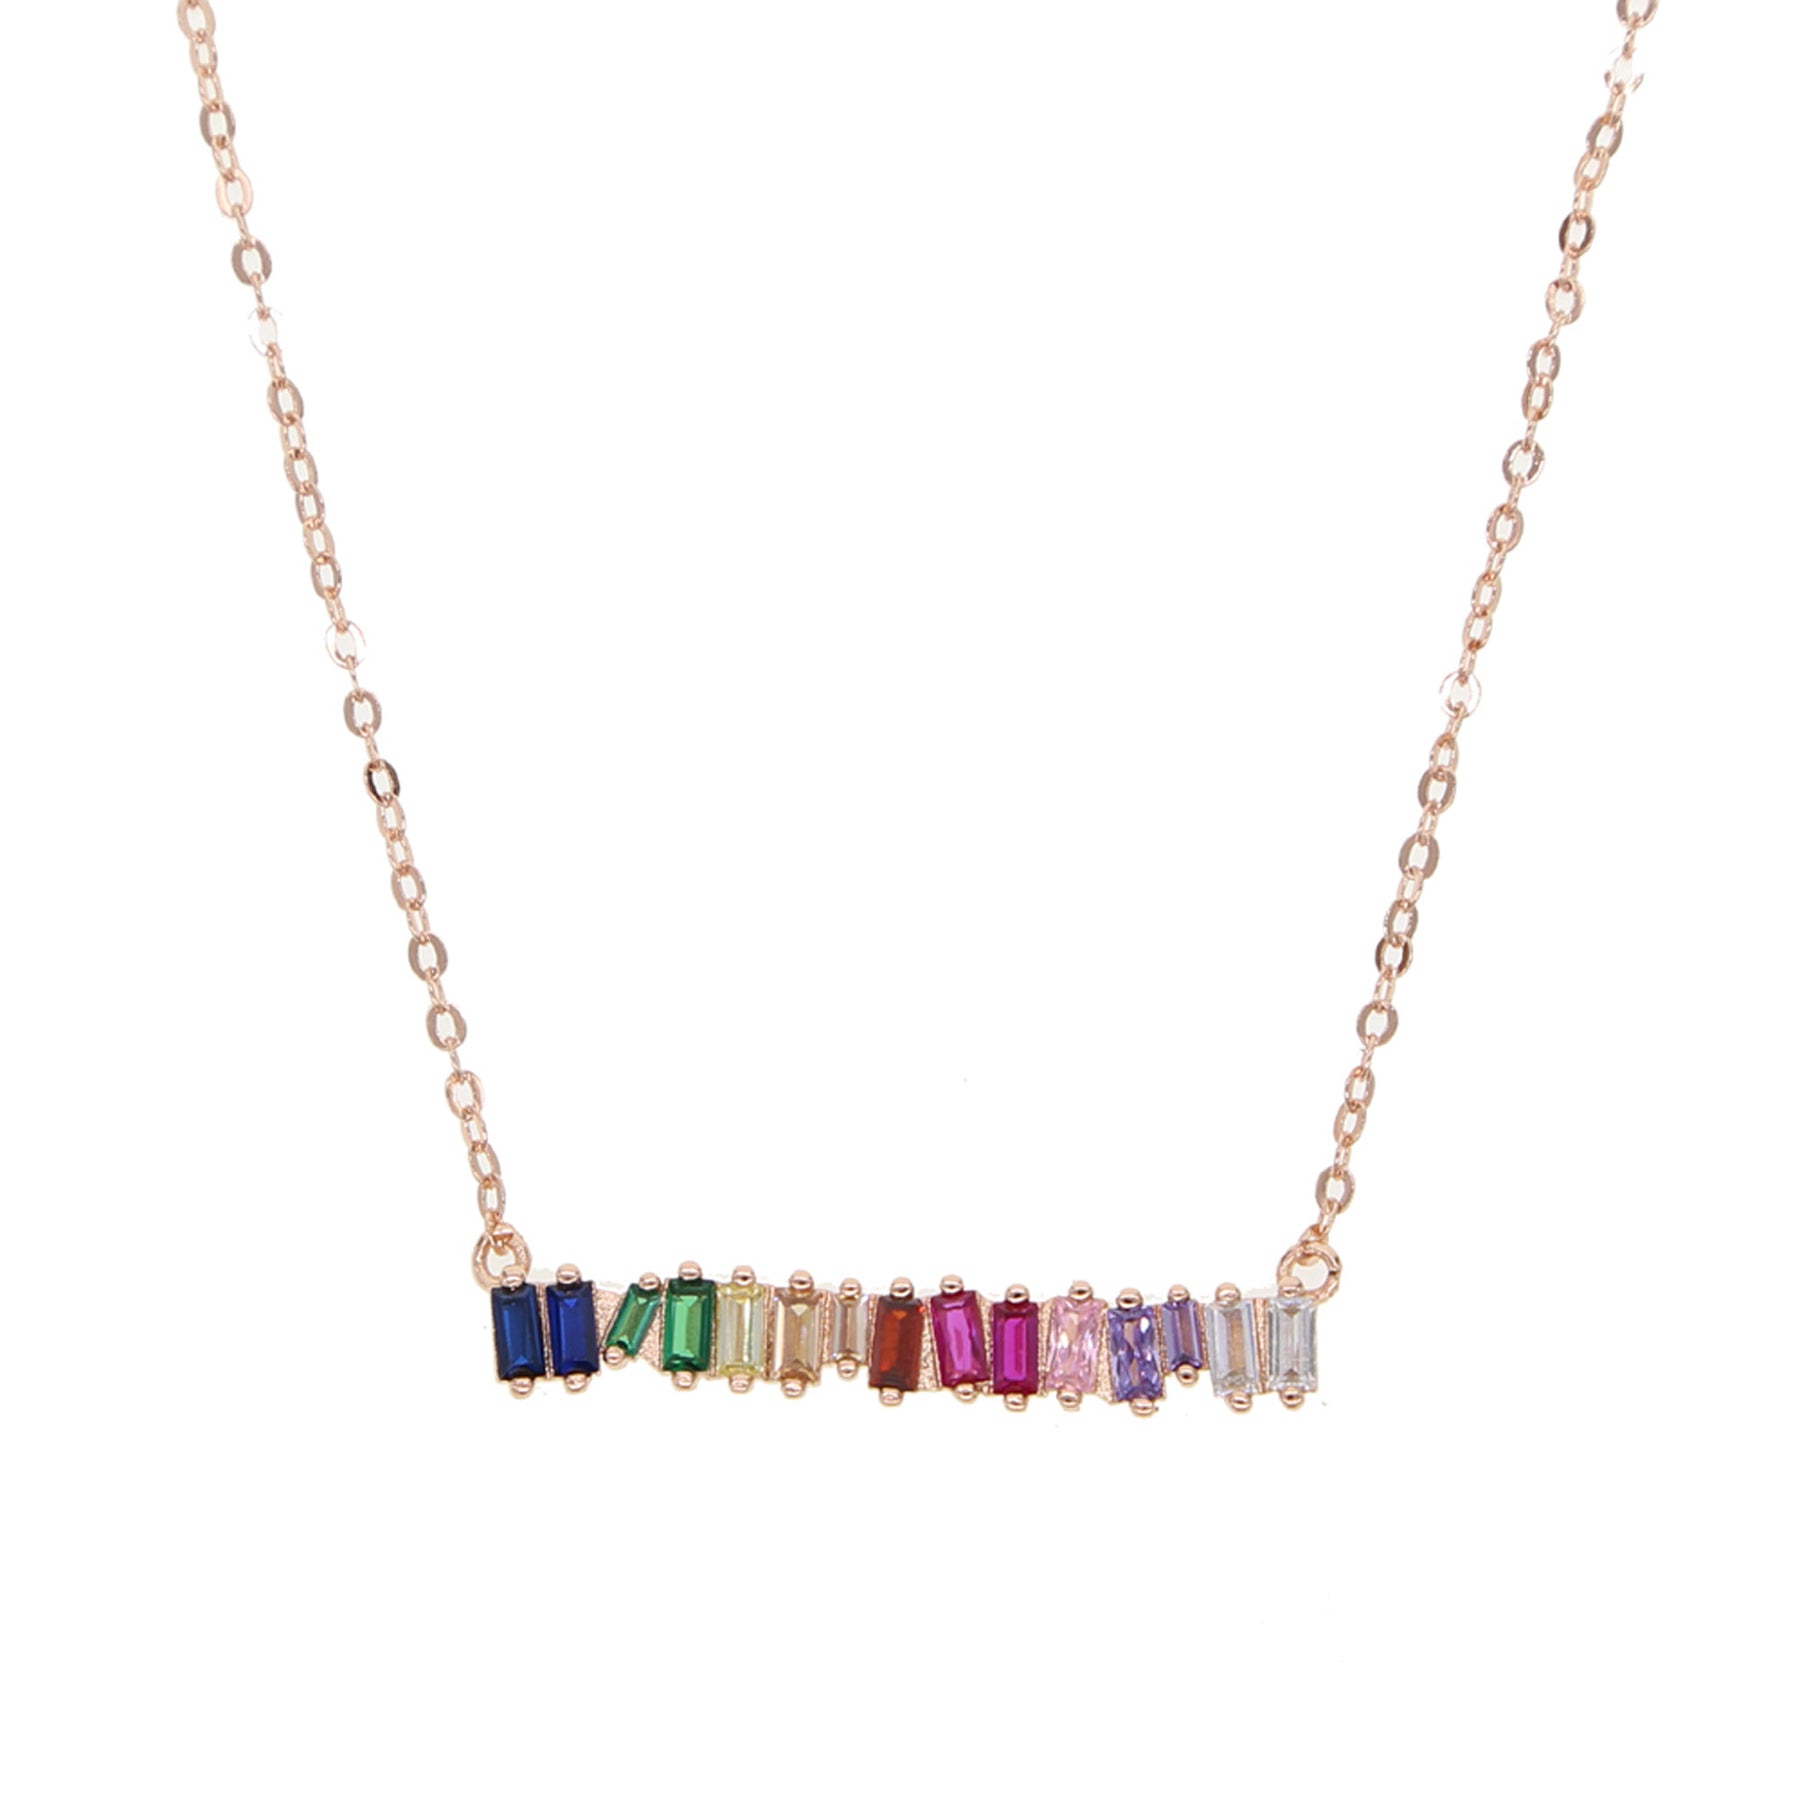 Jolly Rainbow Jagged Crystal Rectangle Pendant Chain Necklace in Gold ...